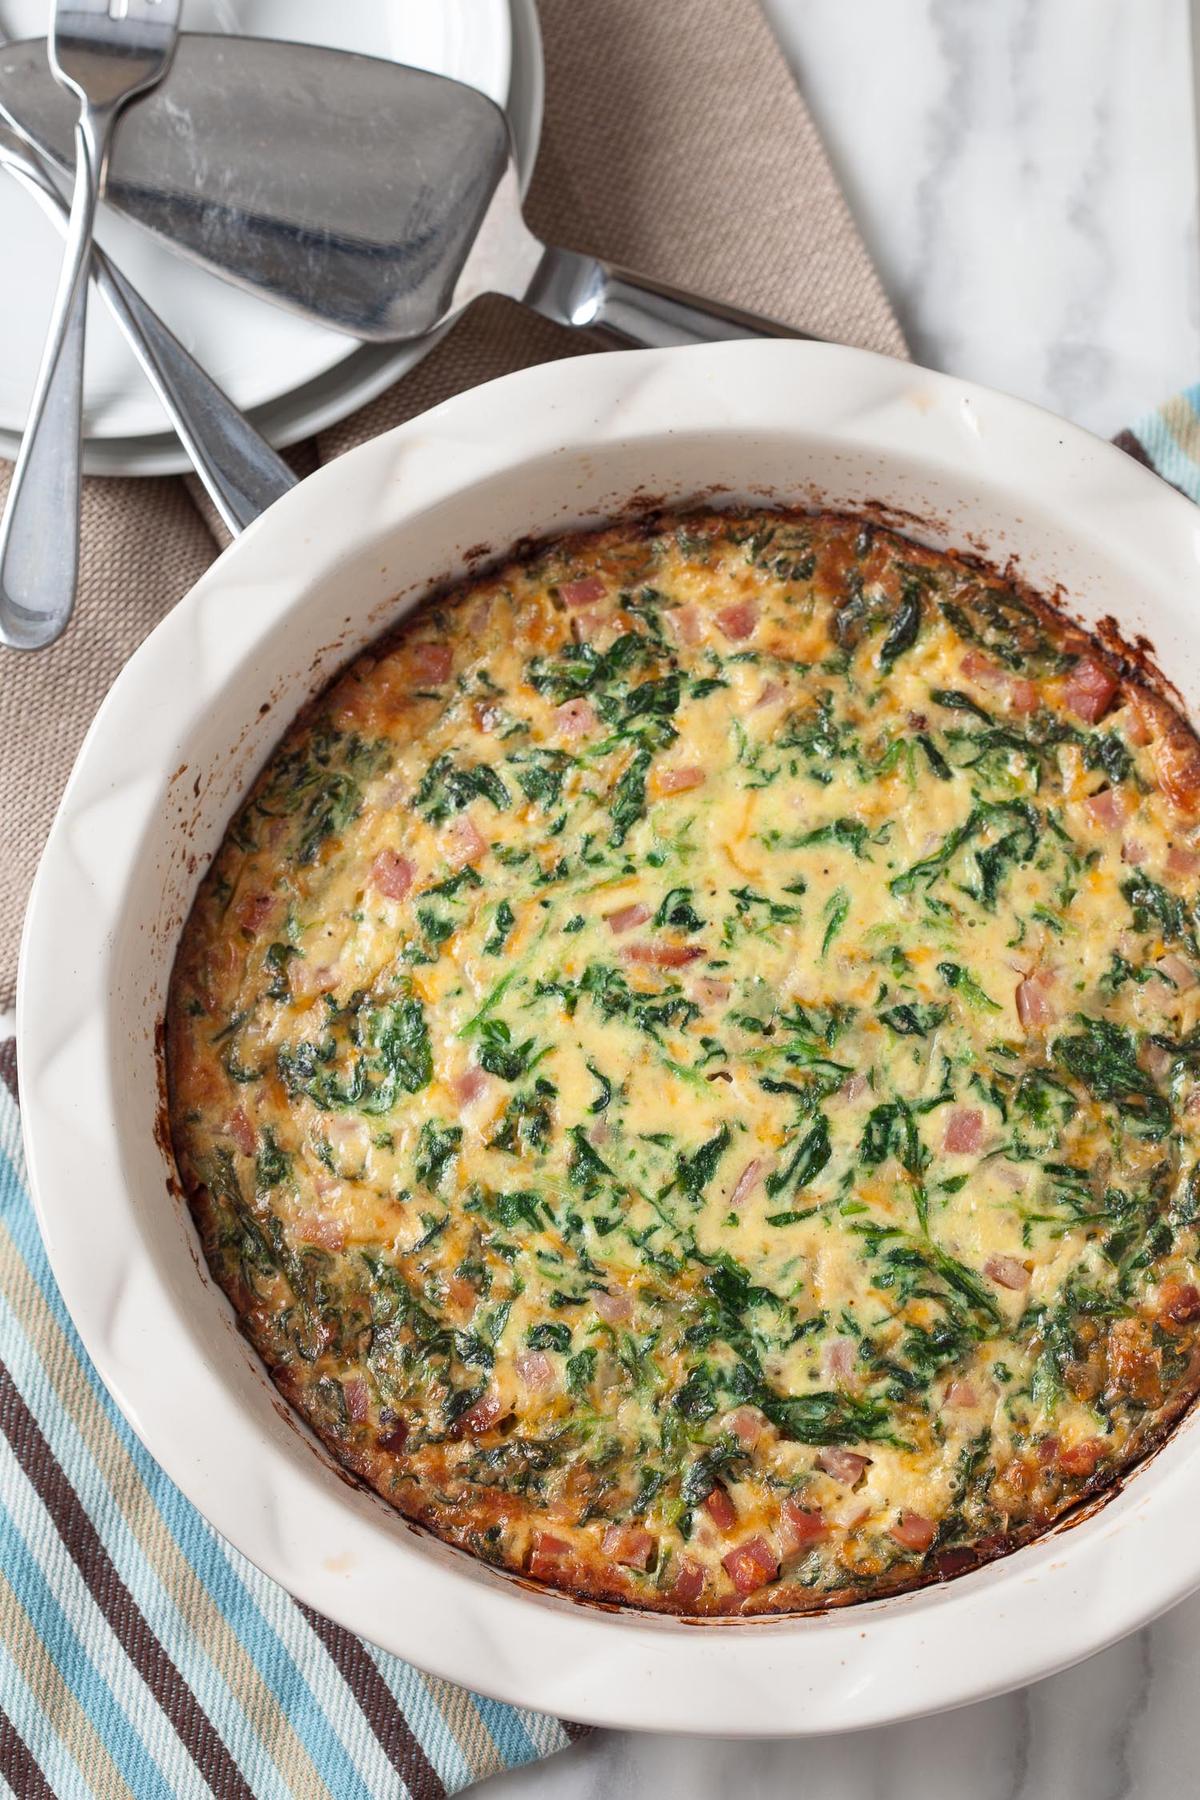 Crustless quiche is the ultimate crowd-pleasing brunch. It’s also fantastic for dinner. (Courtesy of Amy Dong)